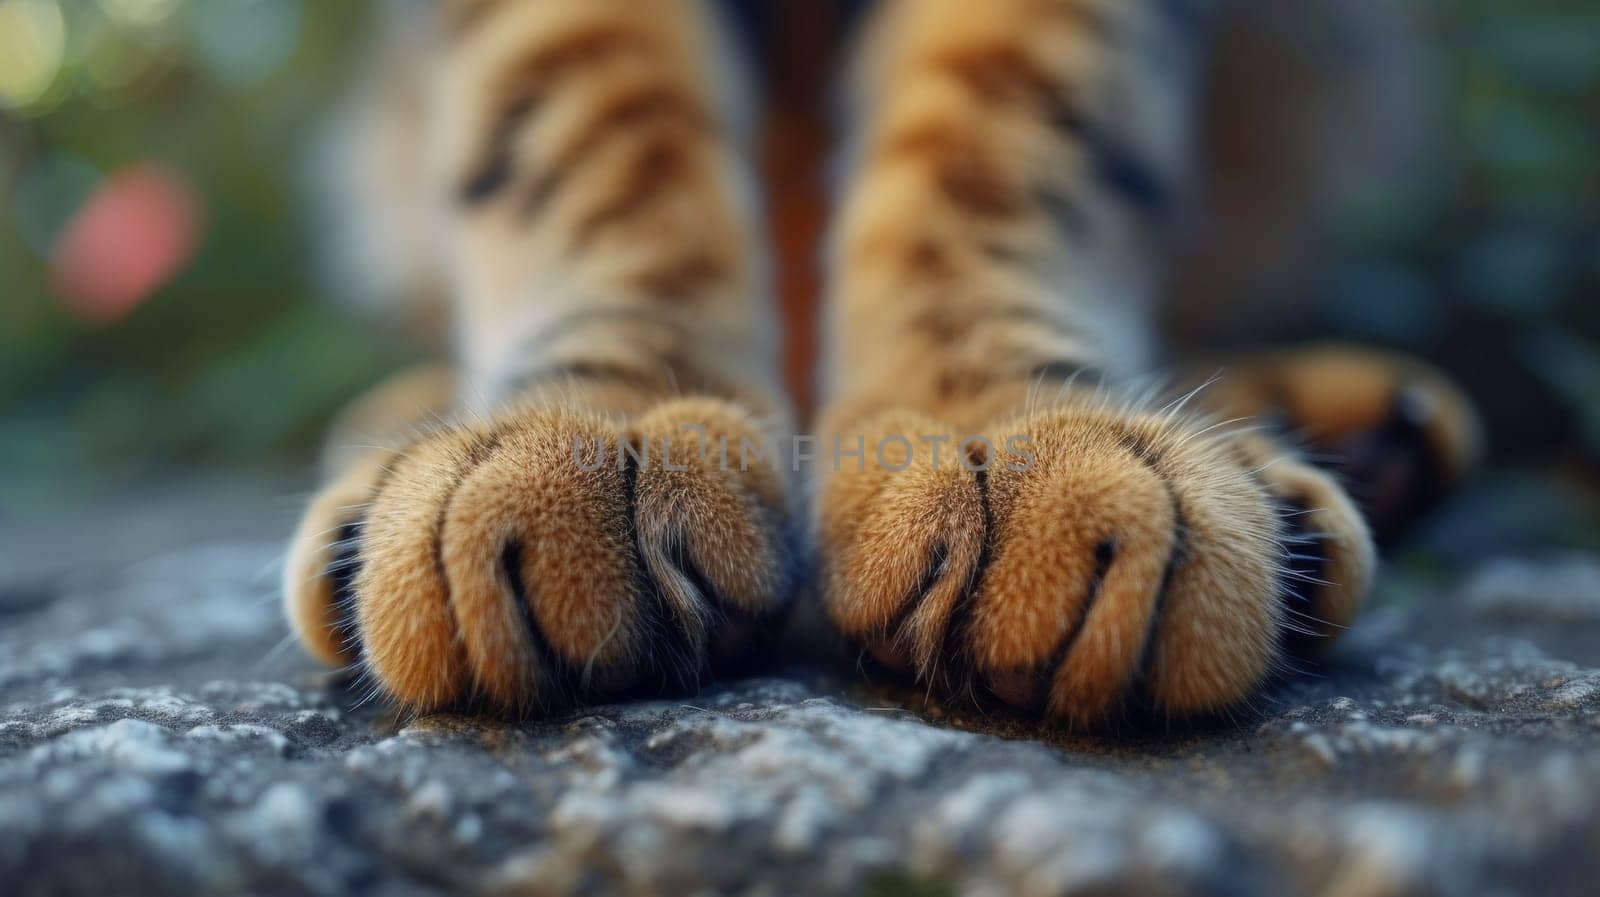 A close up of a cat's paws and claws on the ground